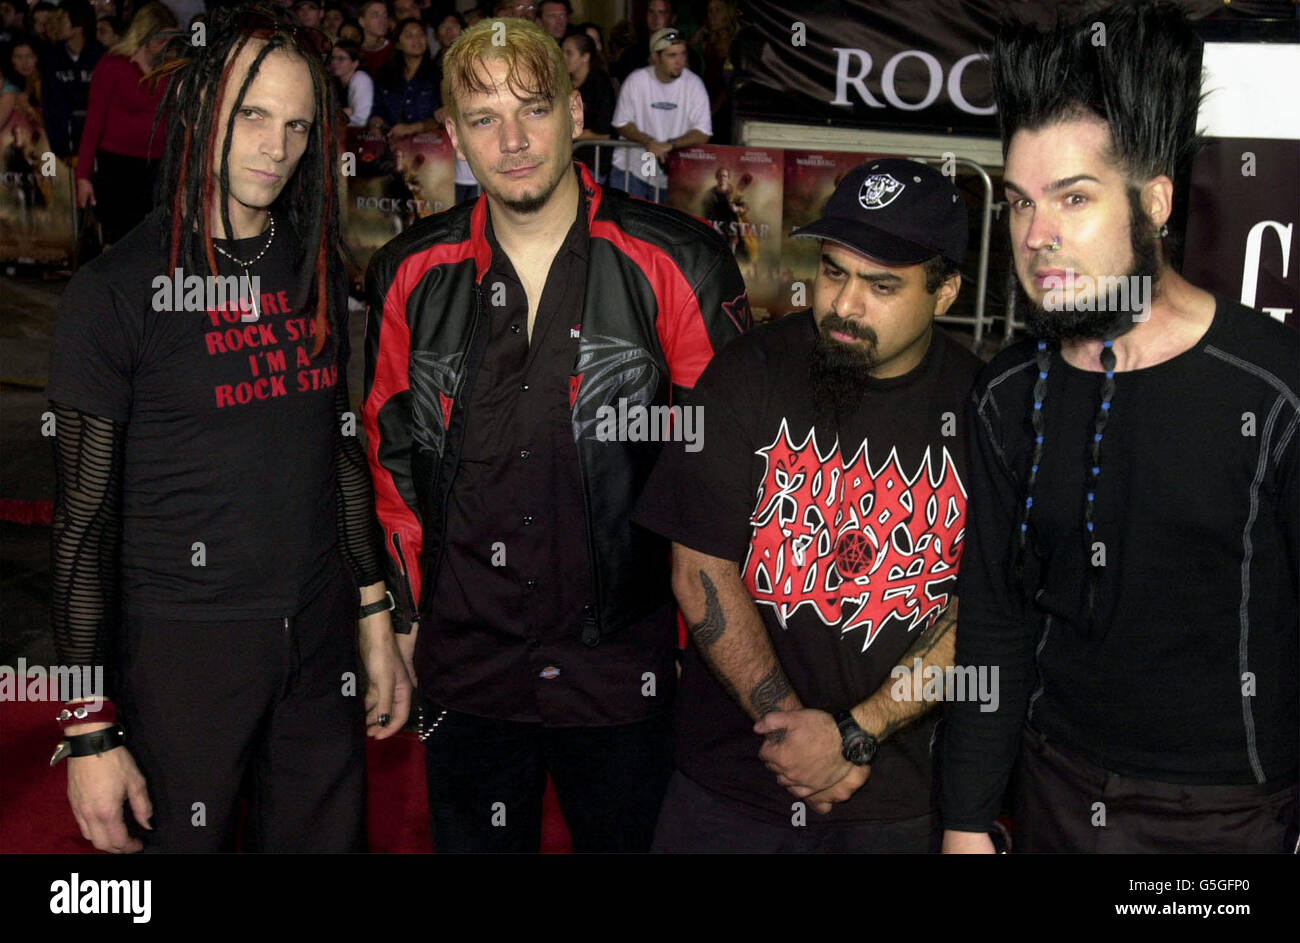 Rockstar premiere/ Static X. Members of the band Static X arriving at the US premiere of the film Rockstar, in Los Angeles, USA. Stock Photo